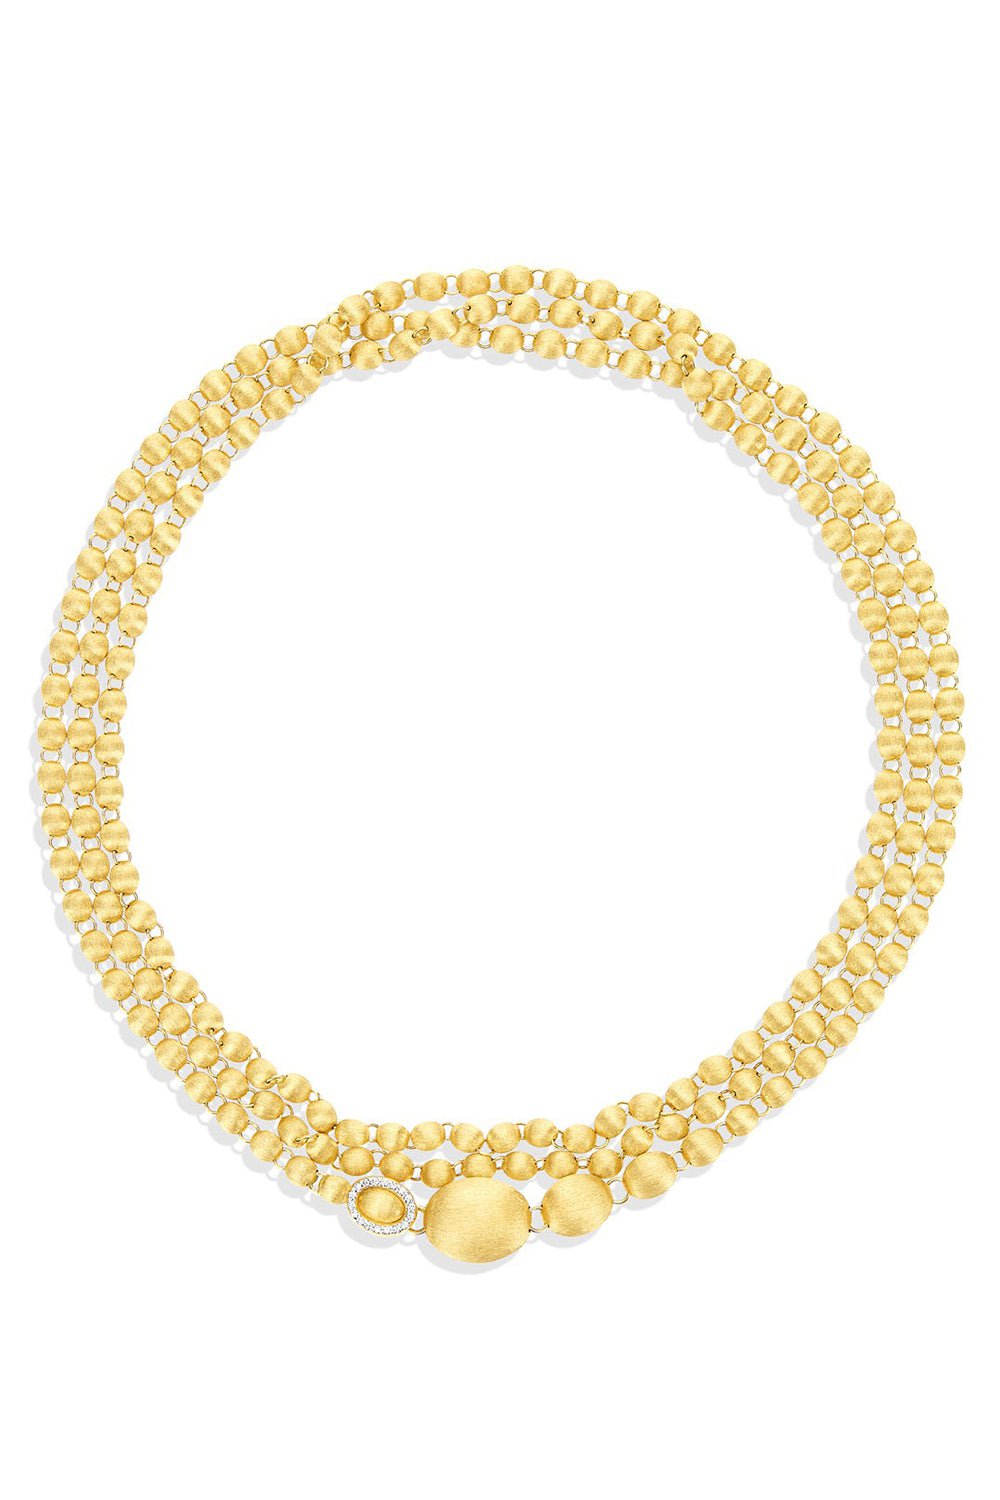 NANIS-Ivy Convertible Statement Necklace-YELLOW GOLD